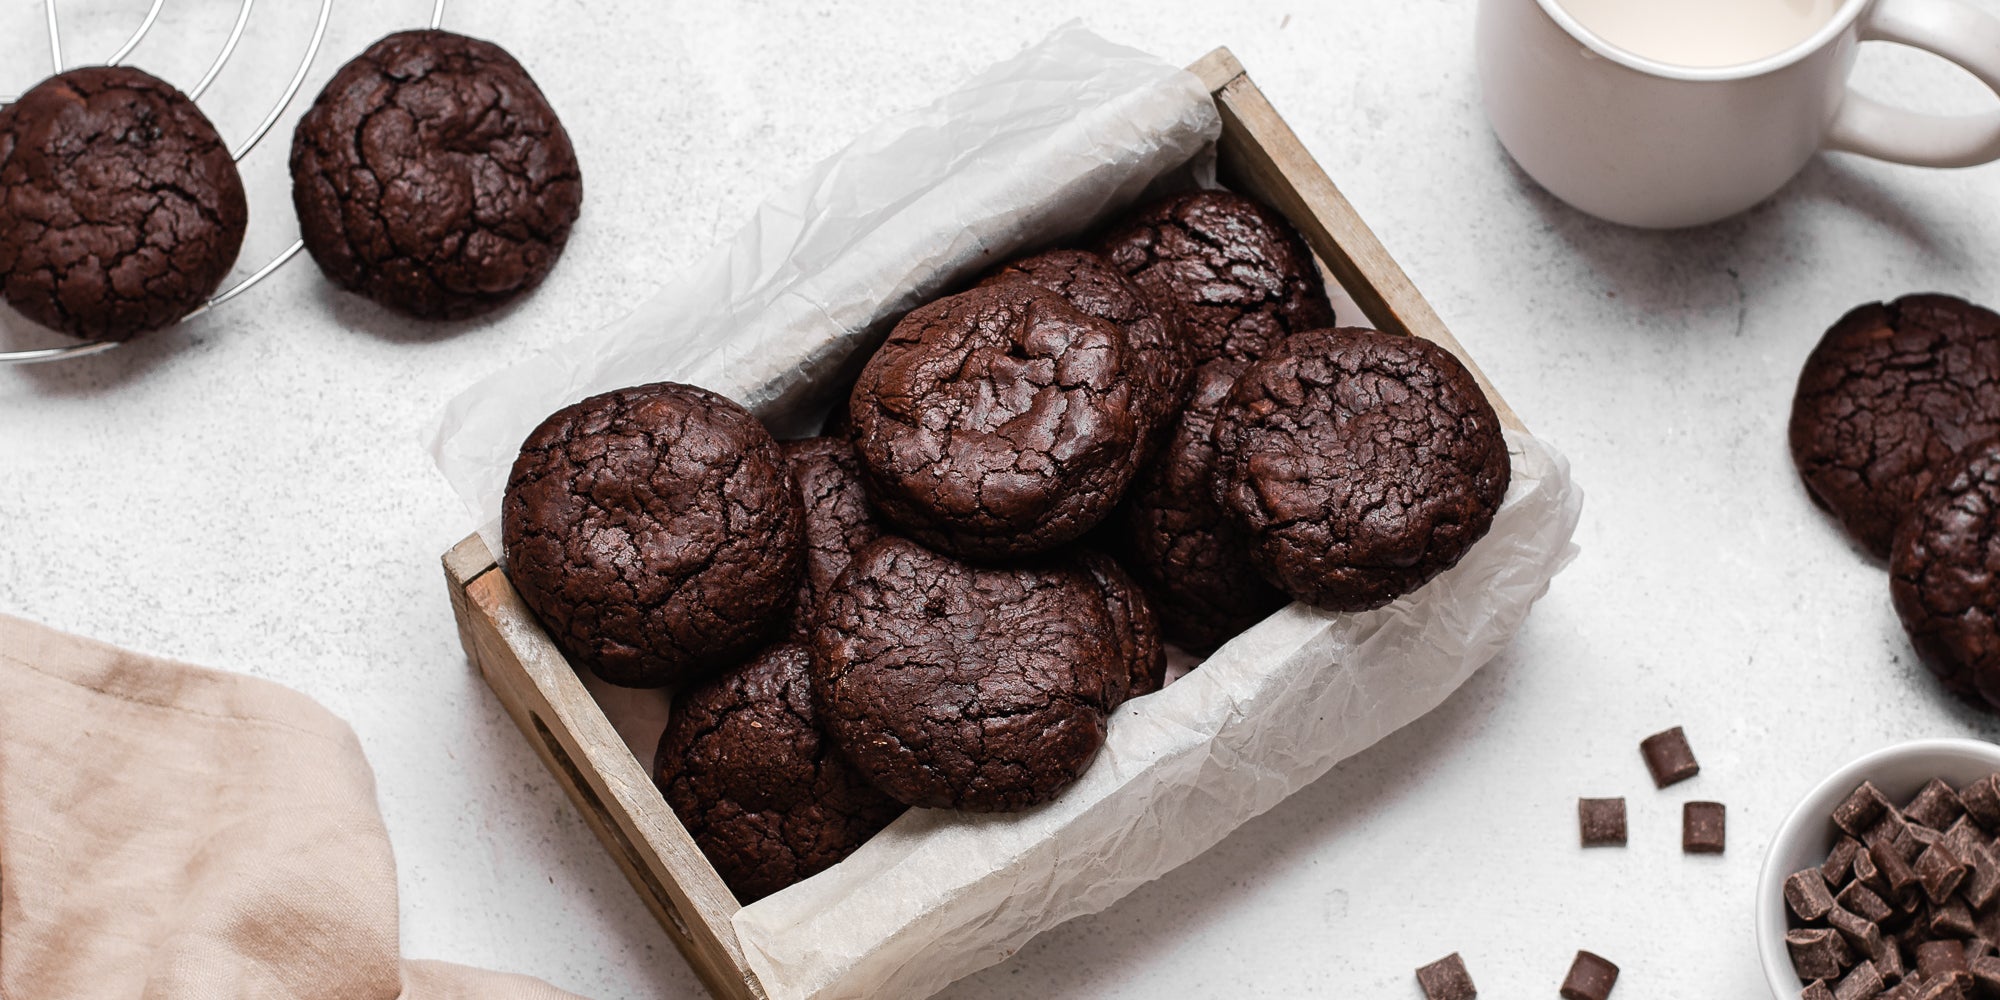 A fresh batch of Chocolate Brownie Cookies in a wooden box lined with baking parchment next to a glass of milk